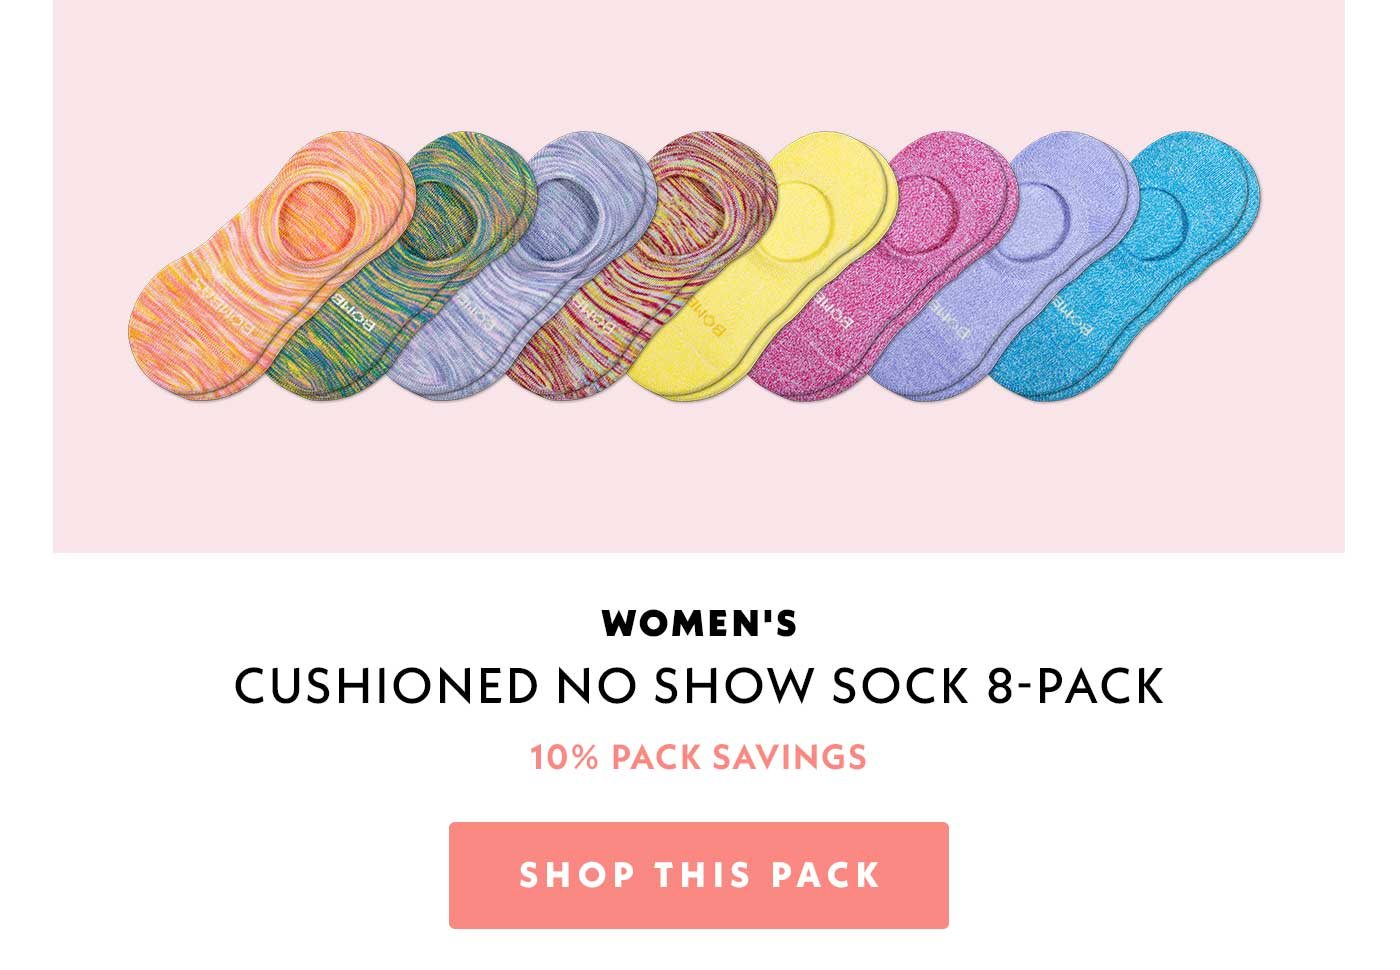 Women's Cushioned No Show Sock 8 Pack | 10% Pack Savings | Shop this Pack